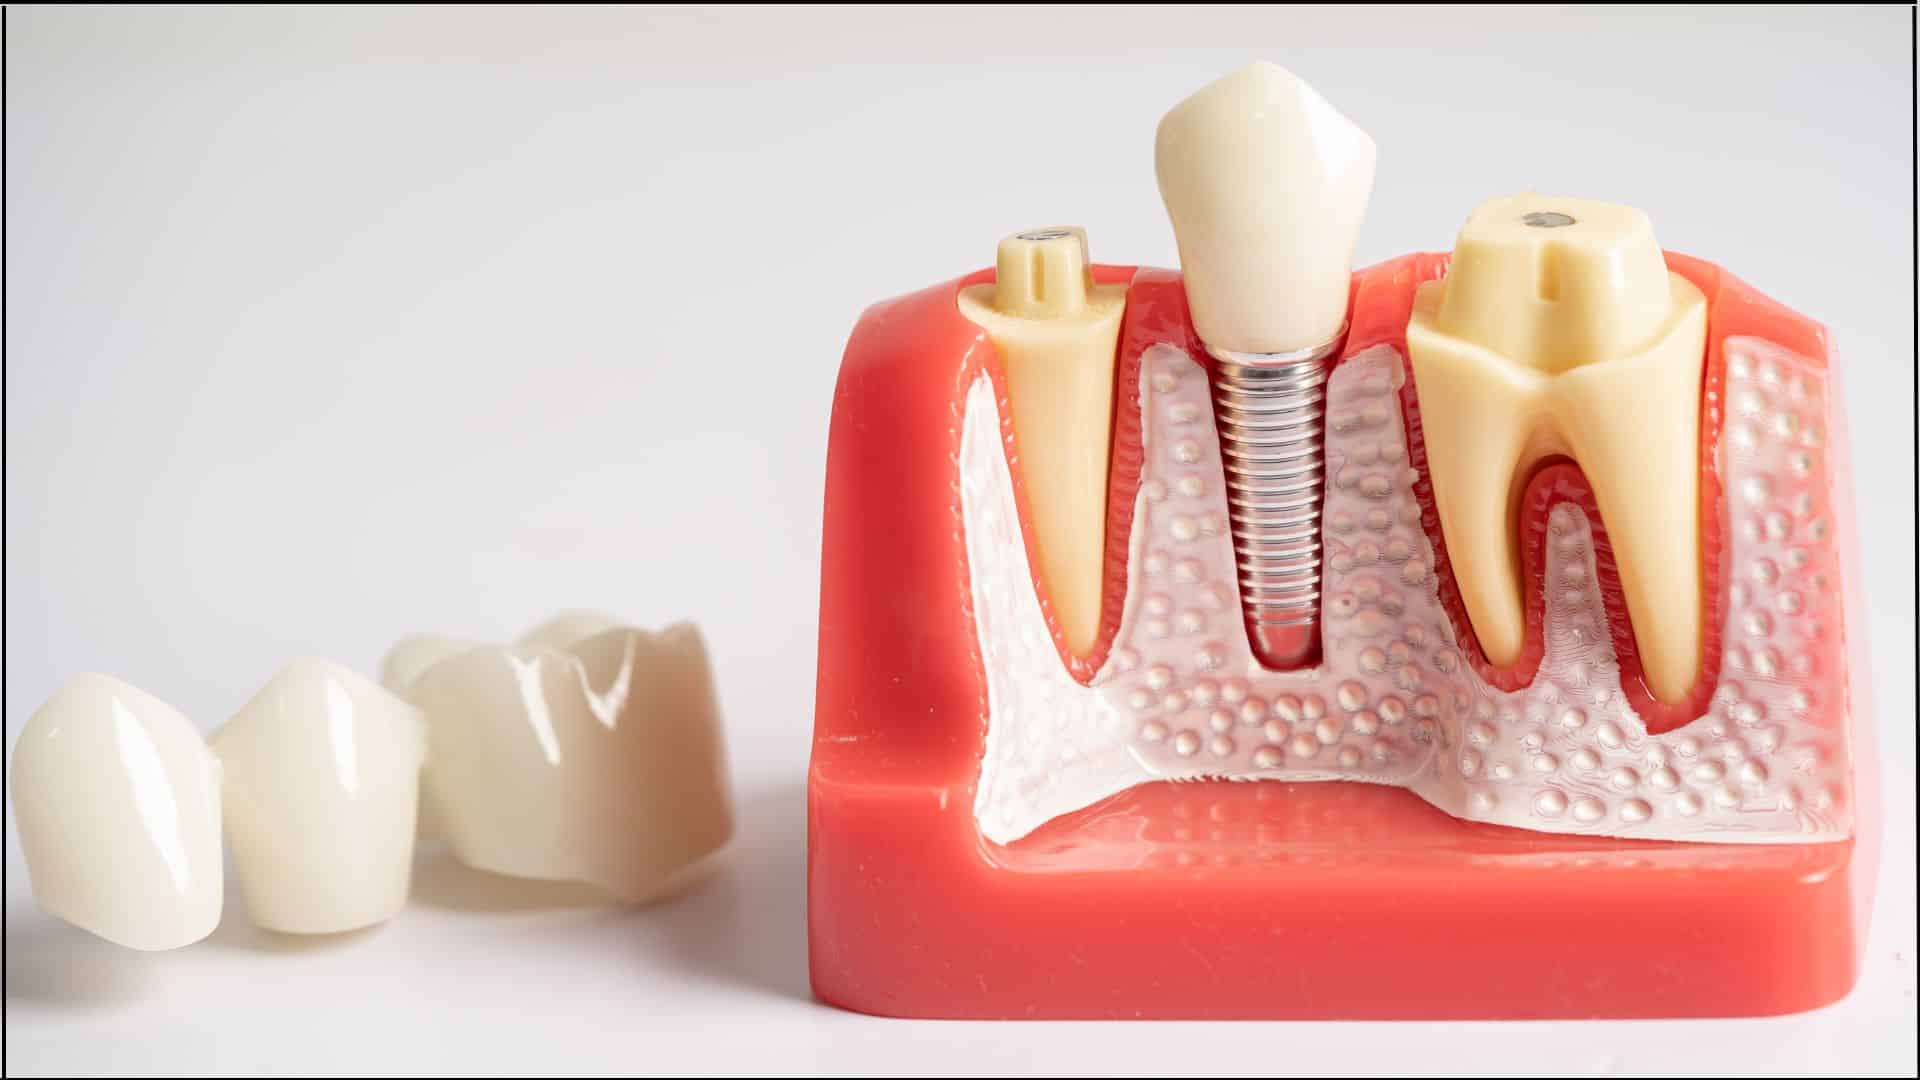 Featured image for “Missing Teeth? How Dental Implants Can Restore Your Smile”